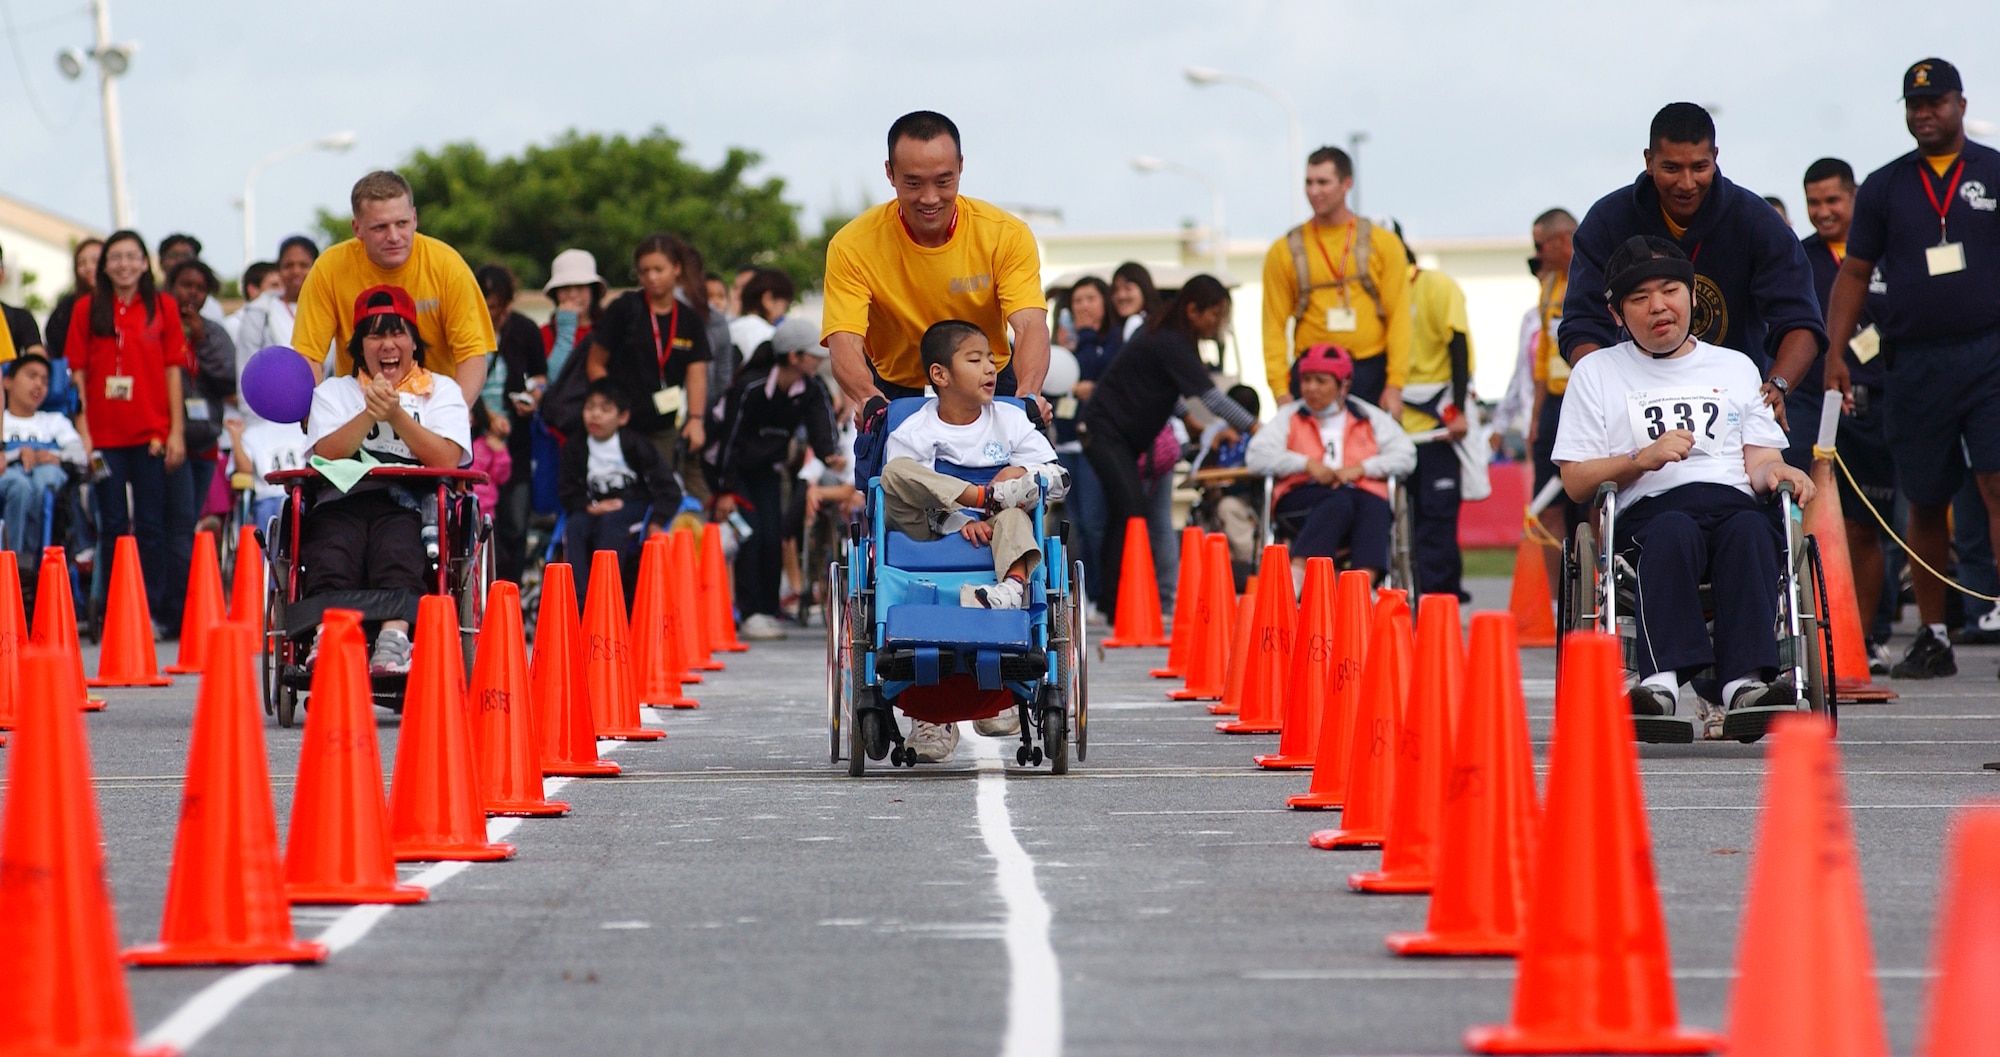 Military volunteers push special needs individuals in wheel chairs to the finish line during a wheel chair event Nov. 14, 2009 at Kadena Air Base, Japan. Kadena hosted the 10th Annual Special Olympic Games and Art Festival for special needs Okinawan and American adult and child athletes.  (U.S. Air Force photo/Tech. Sgt. Reynaldo Ramon) 
